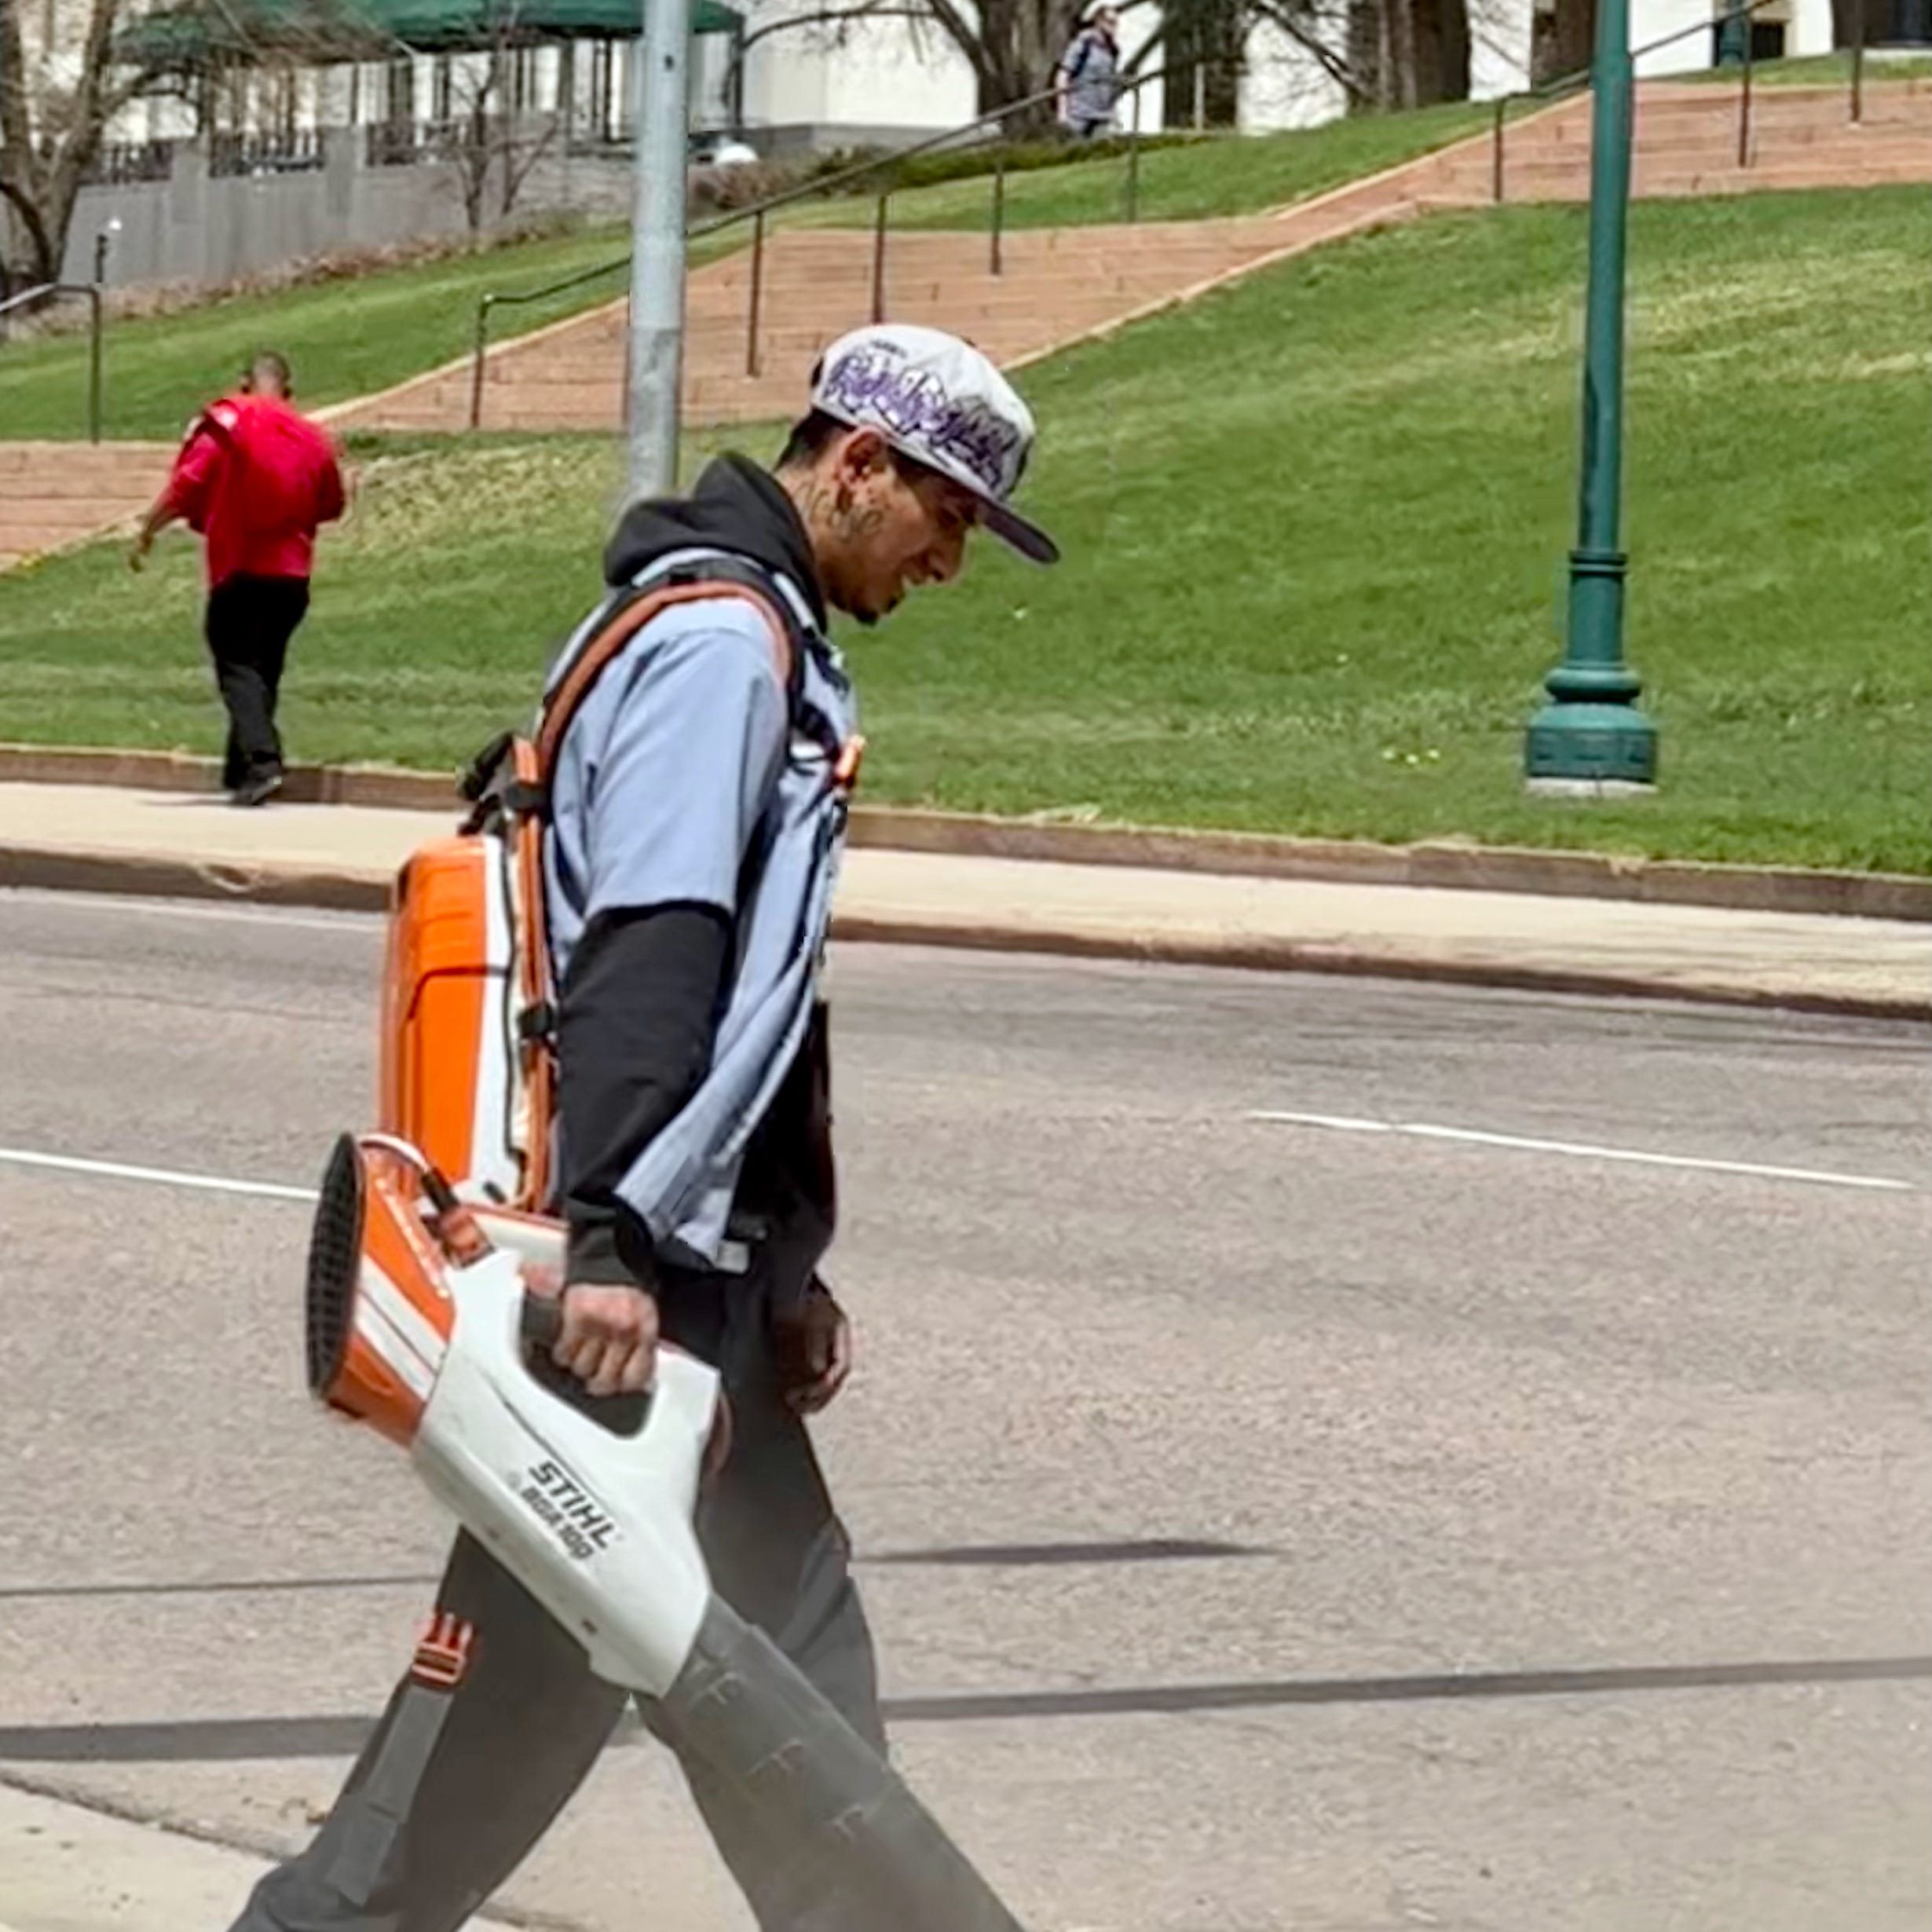 A worker uses a battery-powered leaf blower to  clean gutters in Denver, Colorado. Some regulators are considering limiting the sale and use of gas-powered lawn equipment in the Denver area to improve air quality.